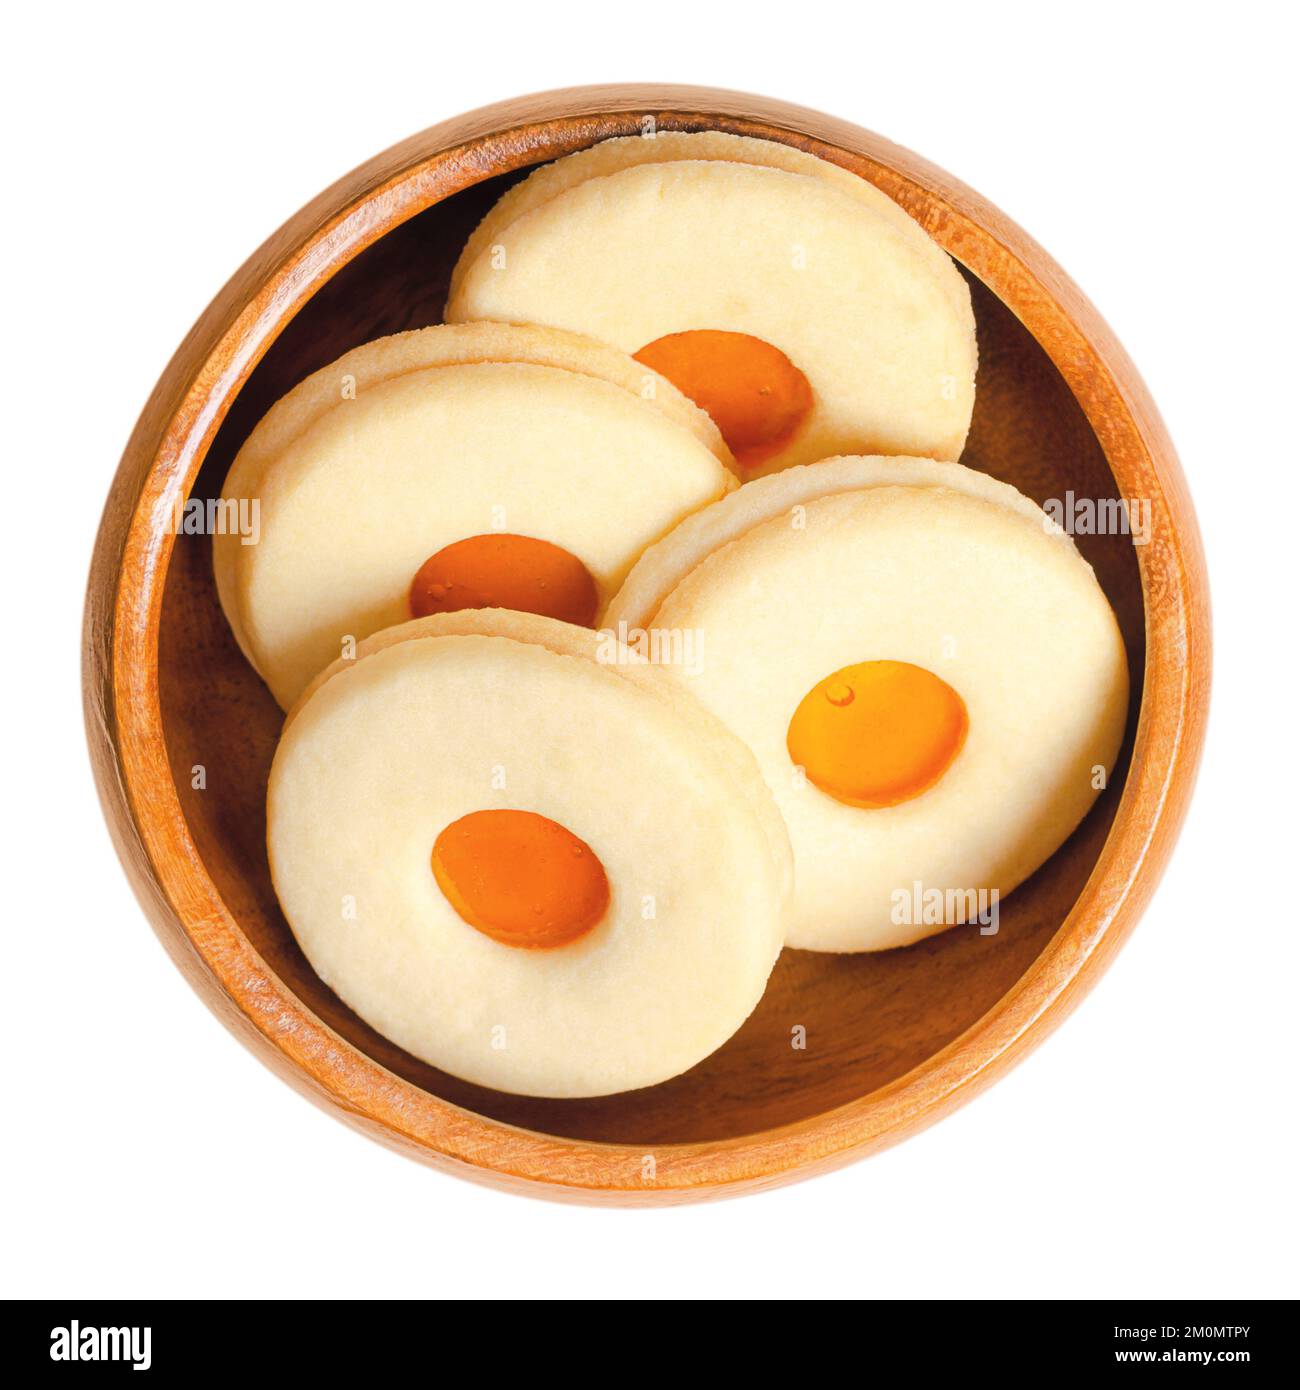 Linzer cookies, traditional Austrian Christmas biscuits, in a wooden bowl. Classic round butter cookies of shortbread. Stock Photo